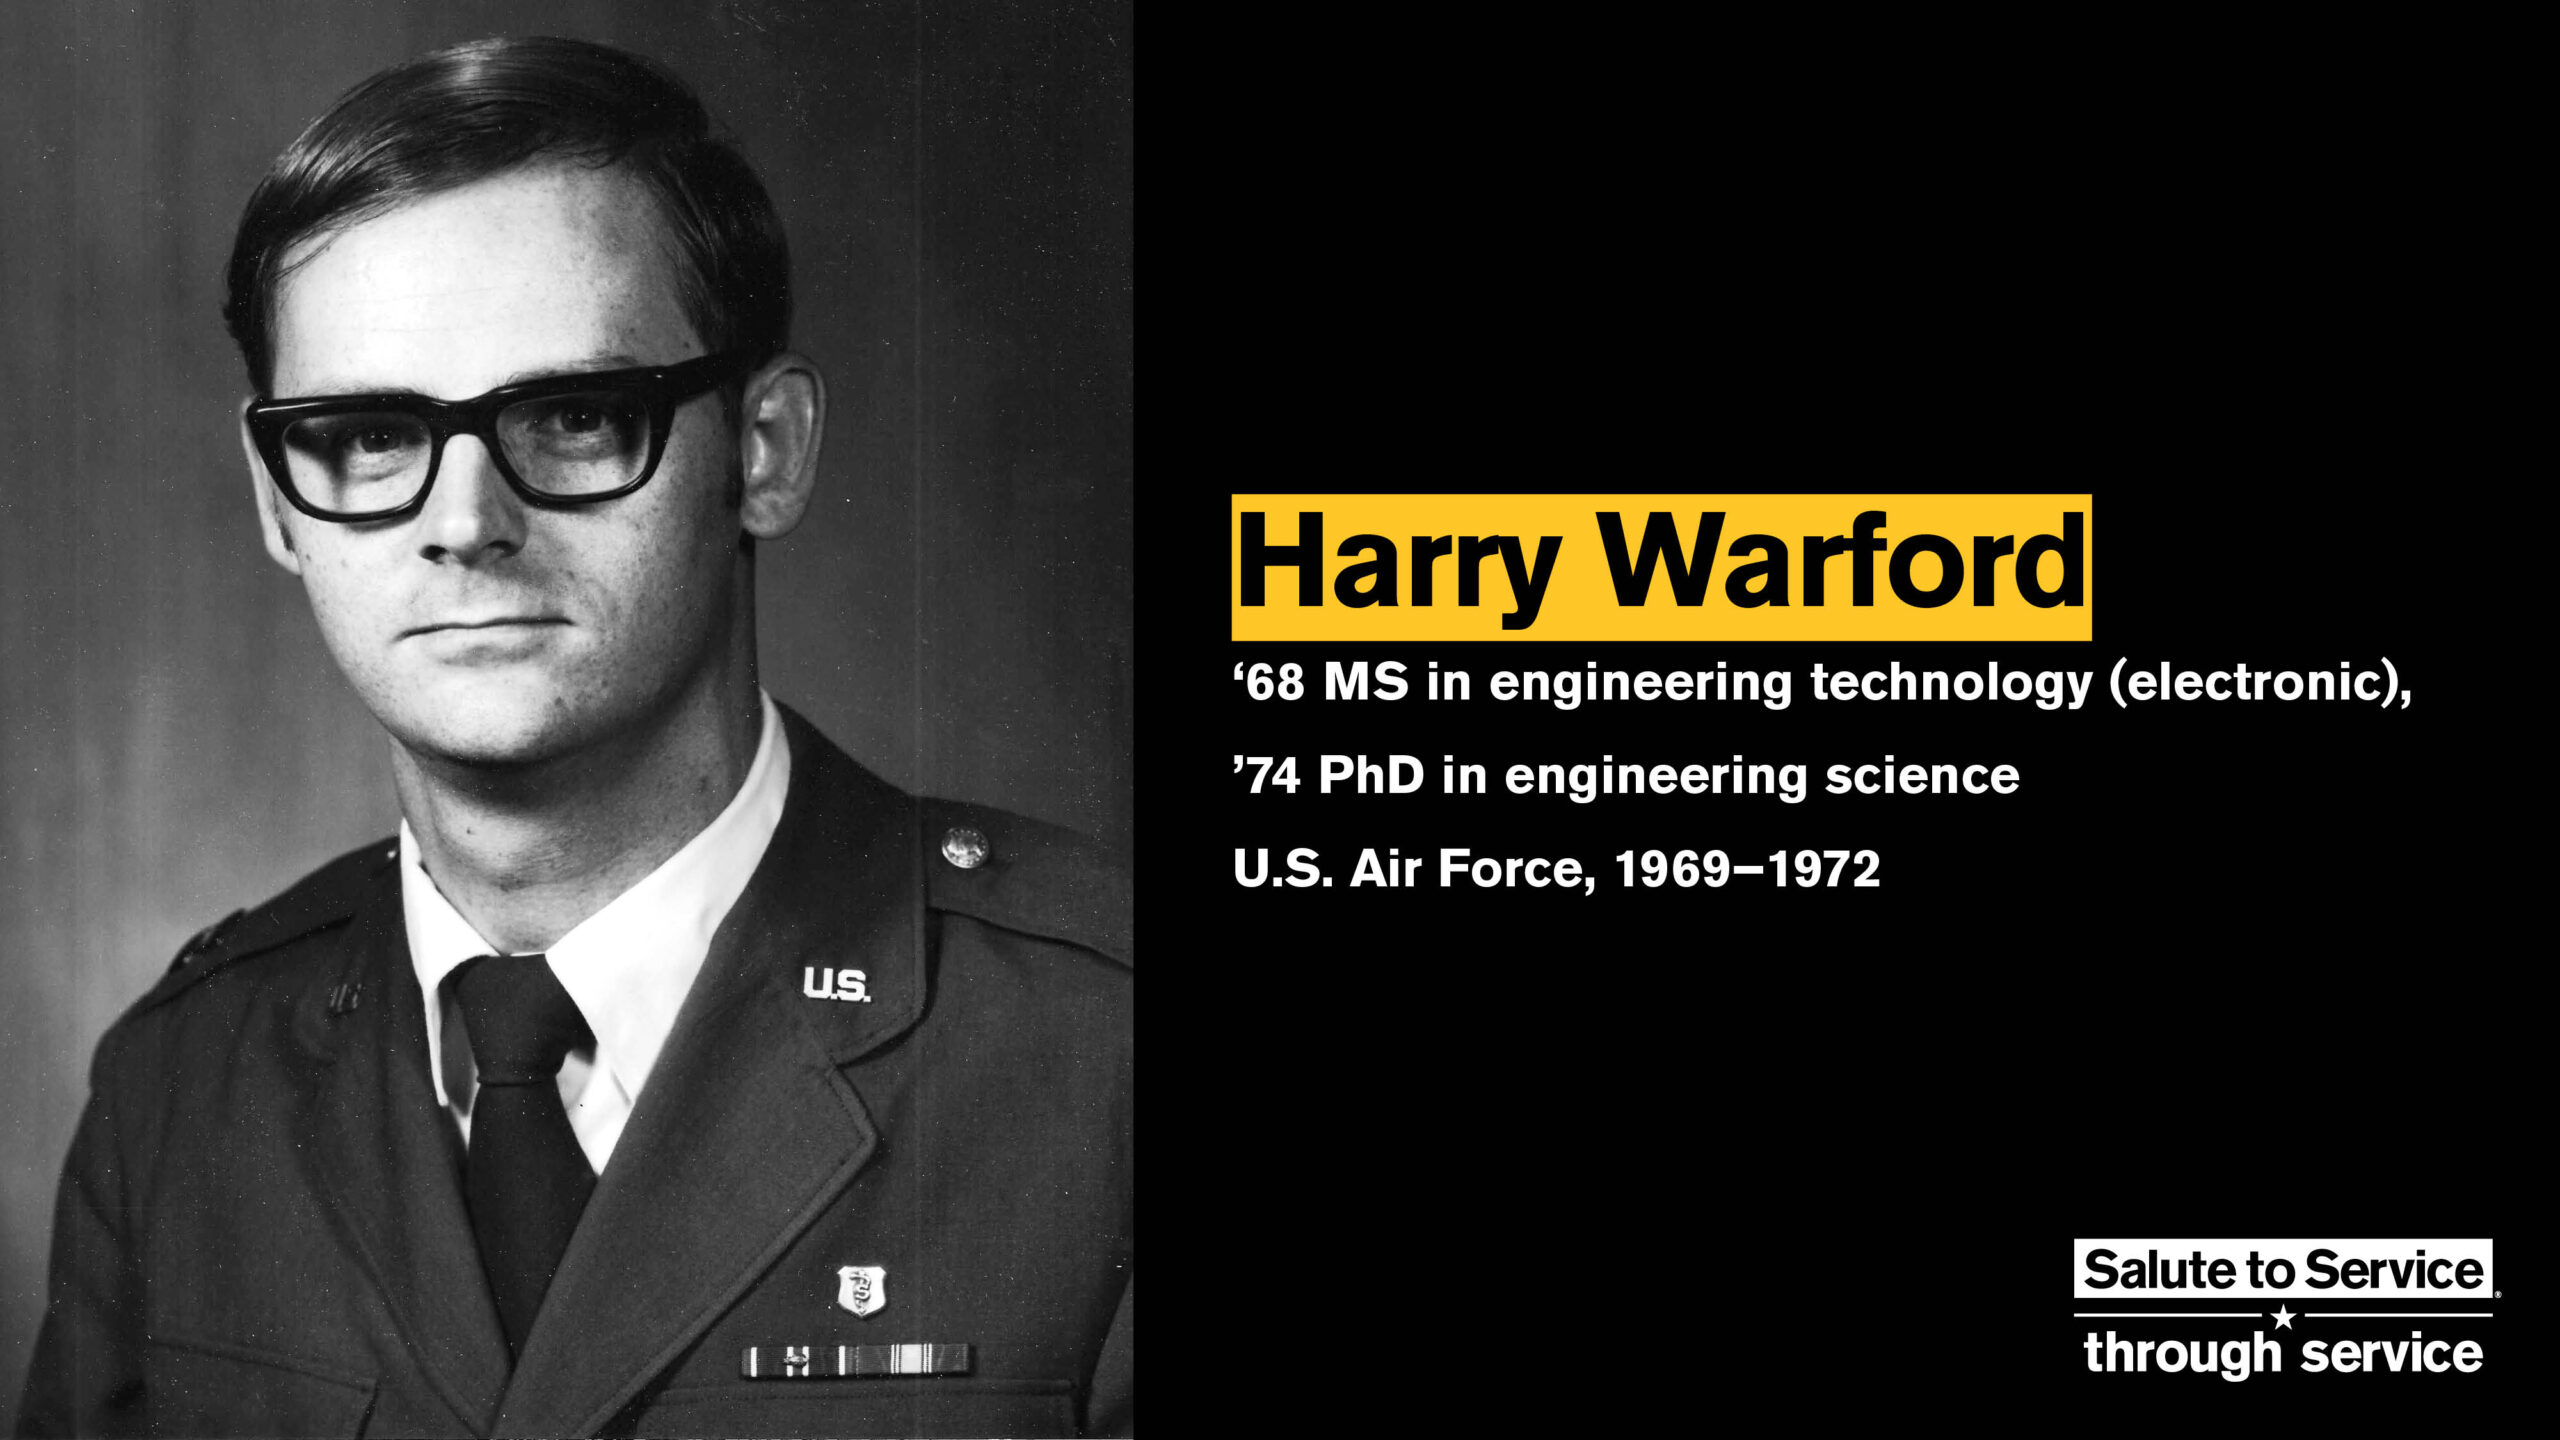 Salute to Service graphic with text that says "Harry Warford" and a photo of him